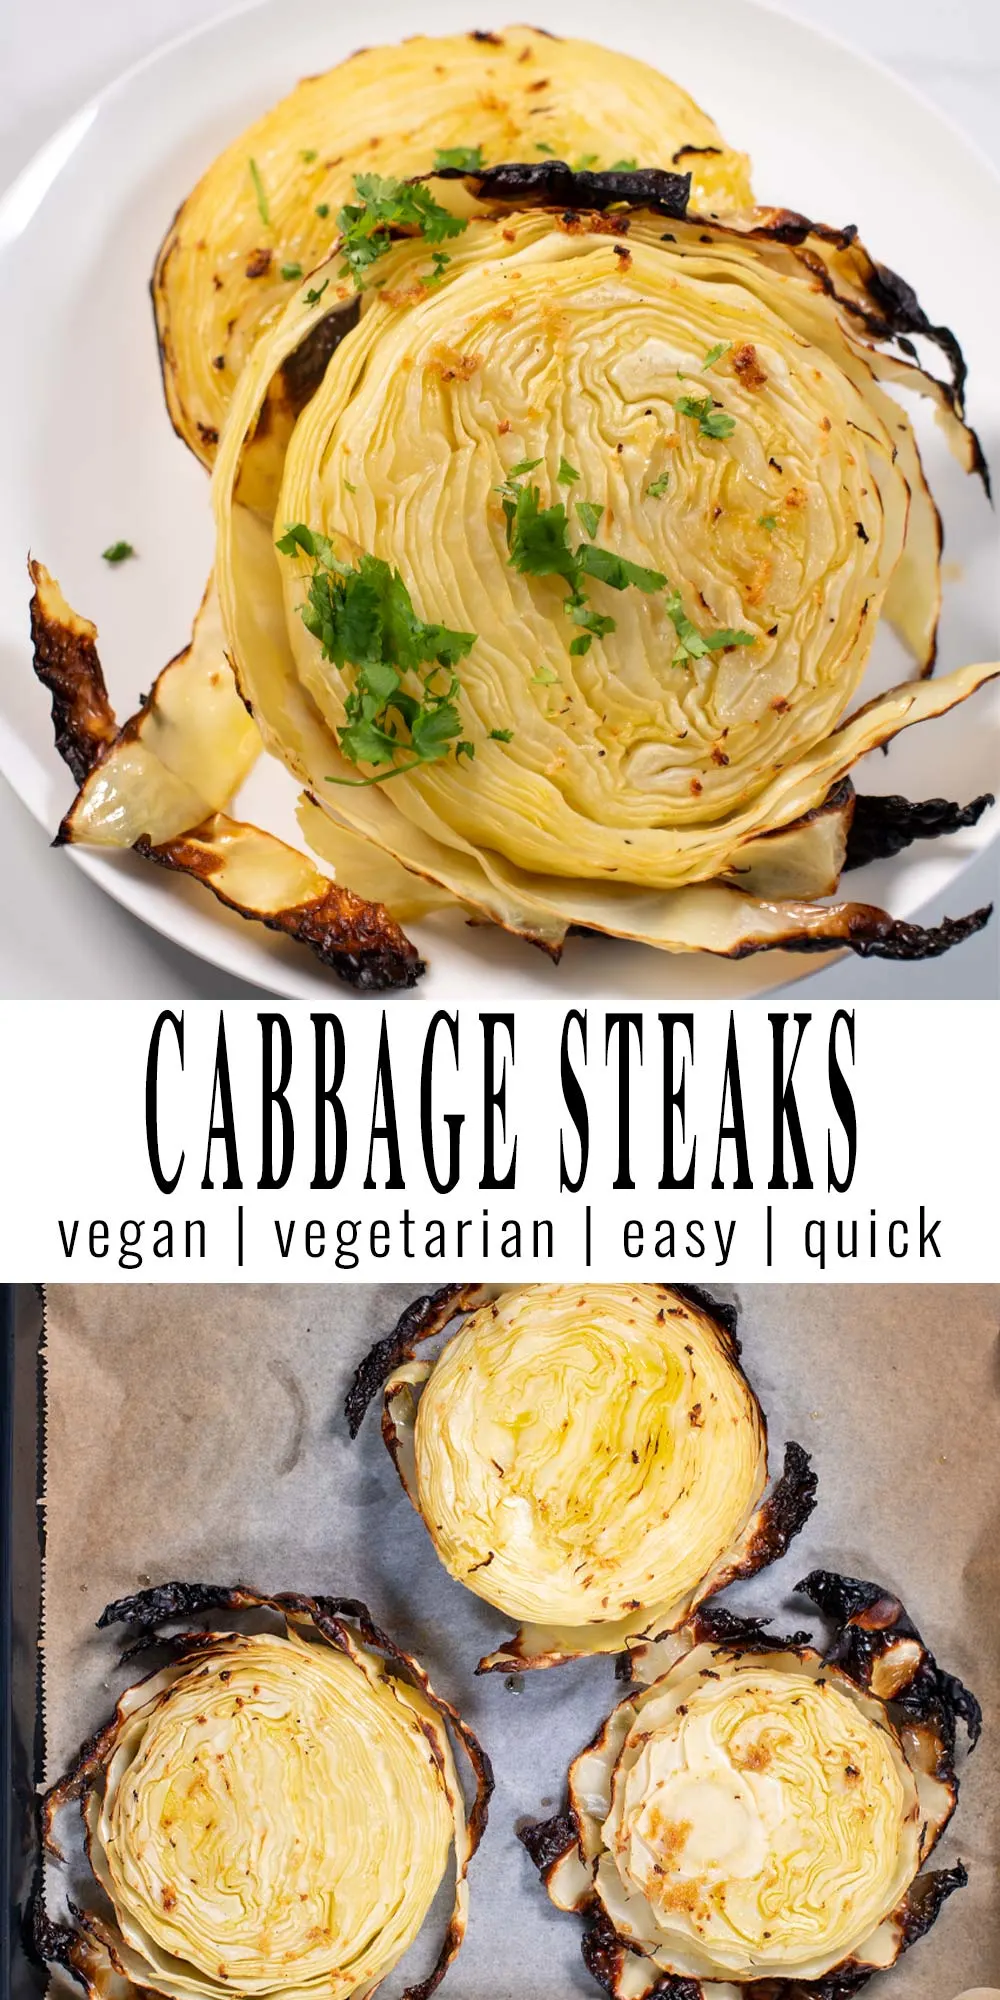 Collage of two photos showing Cabbage Steaks, with recipe title text.